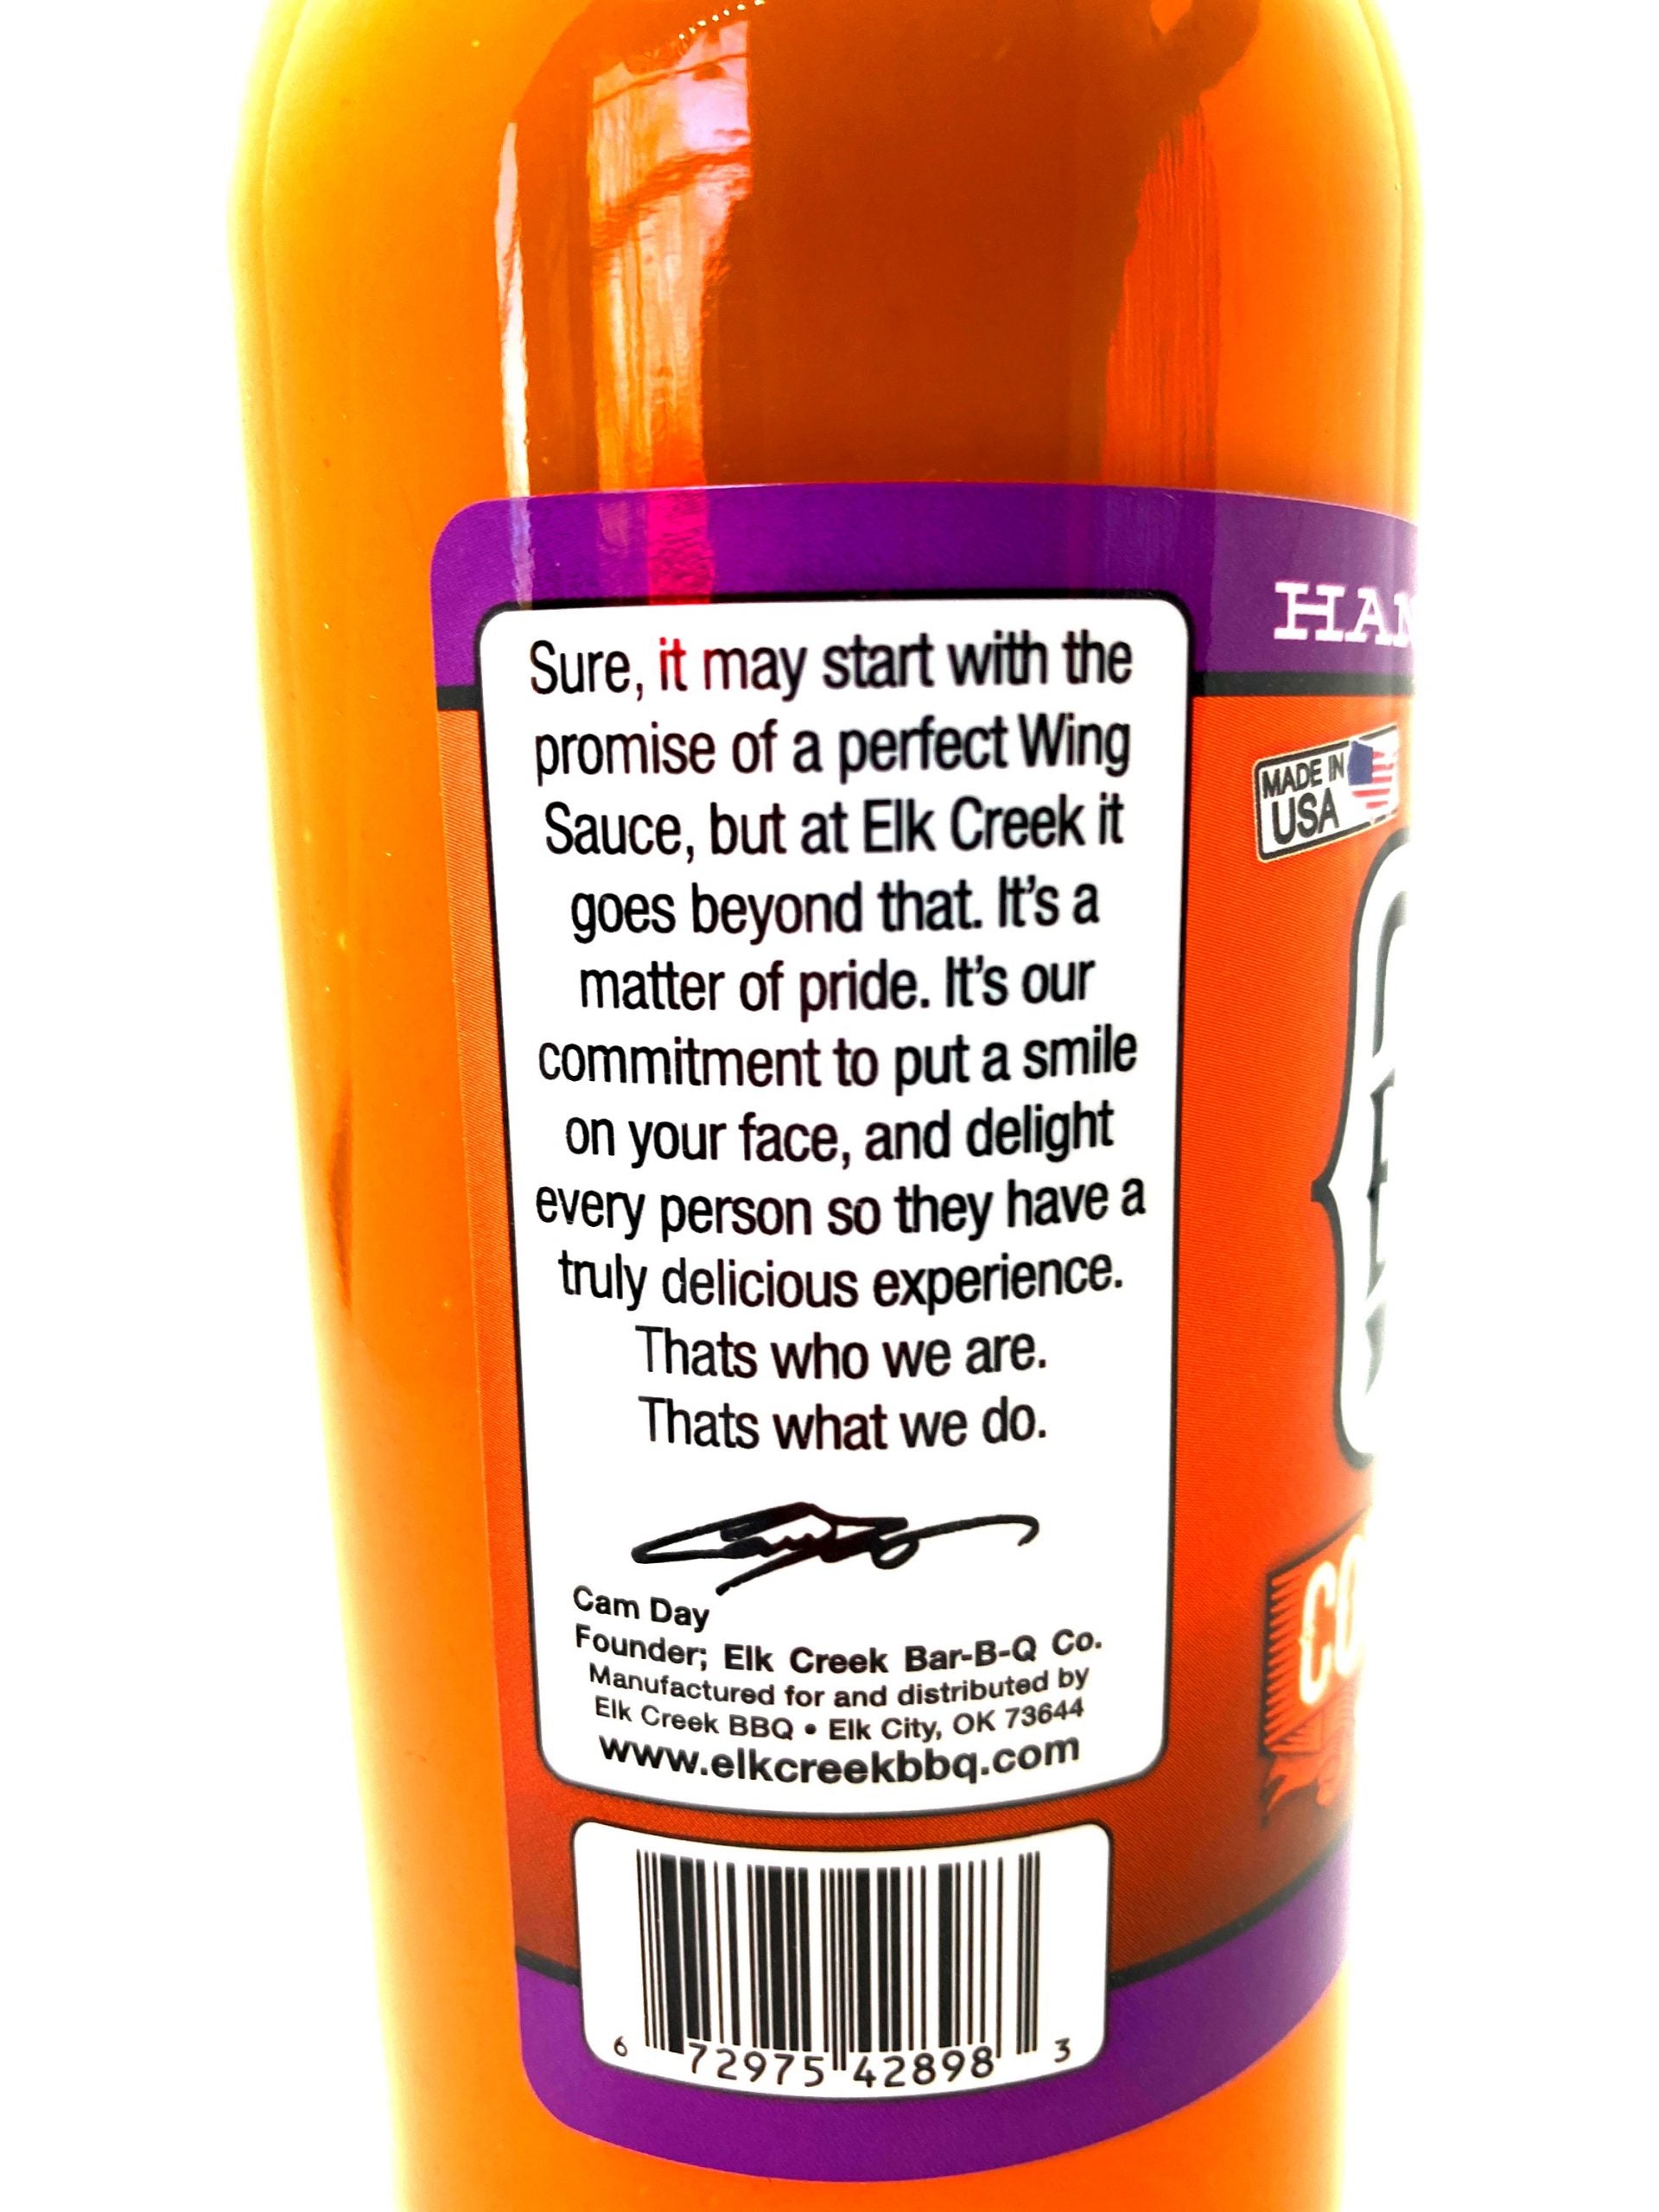 Elk Creek Country Wing Original Sauce Right Side Information